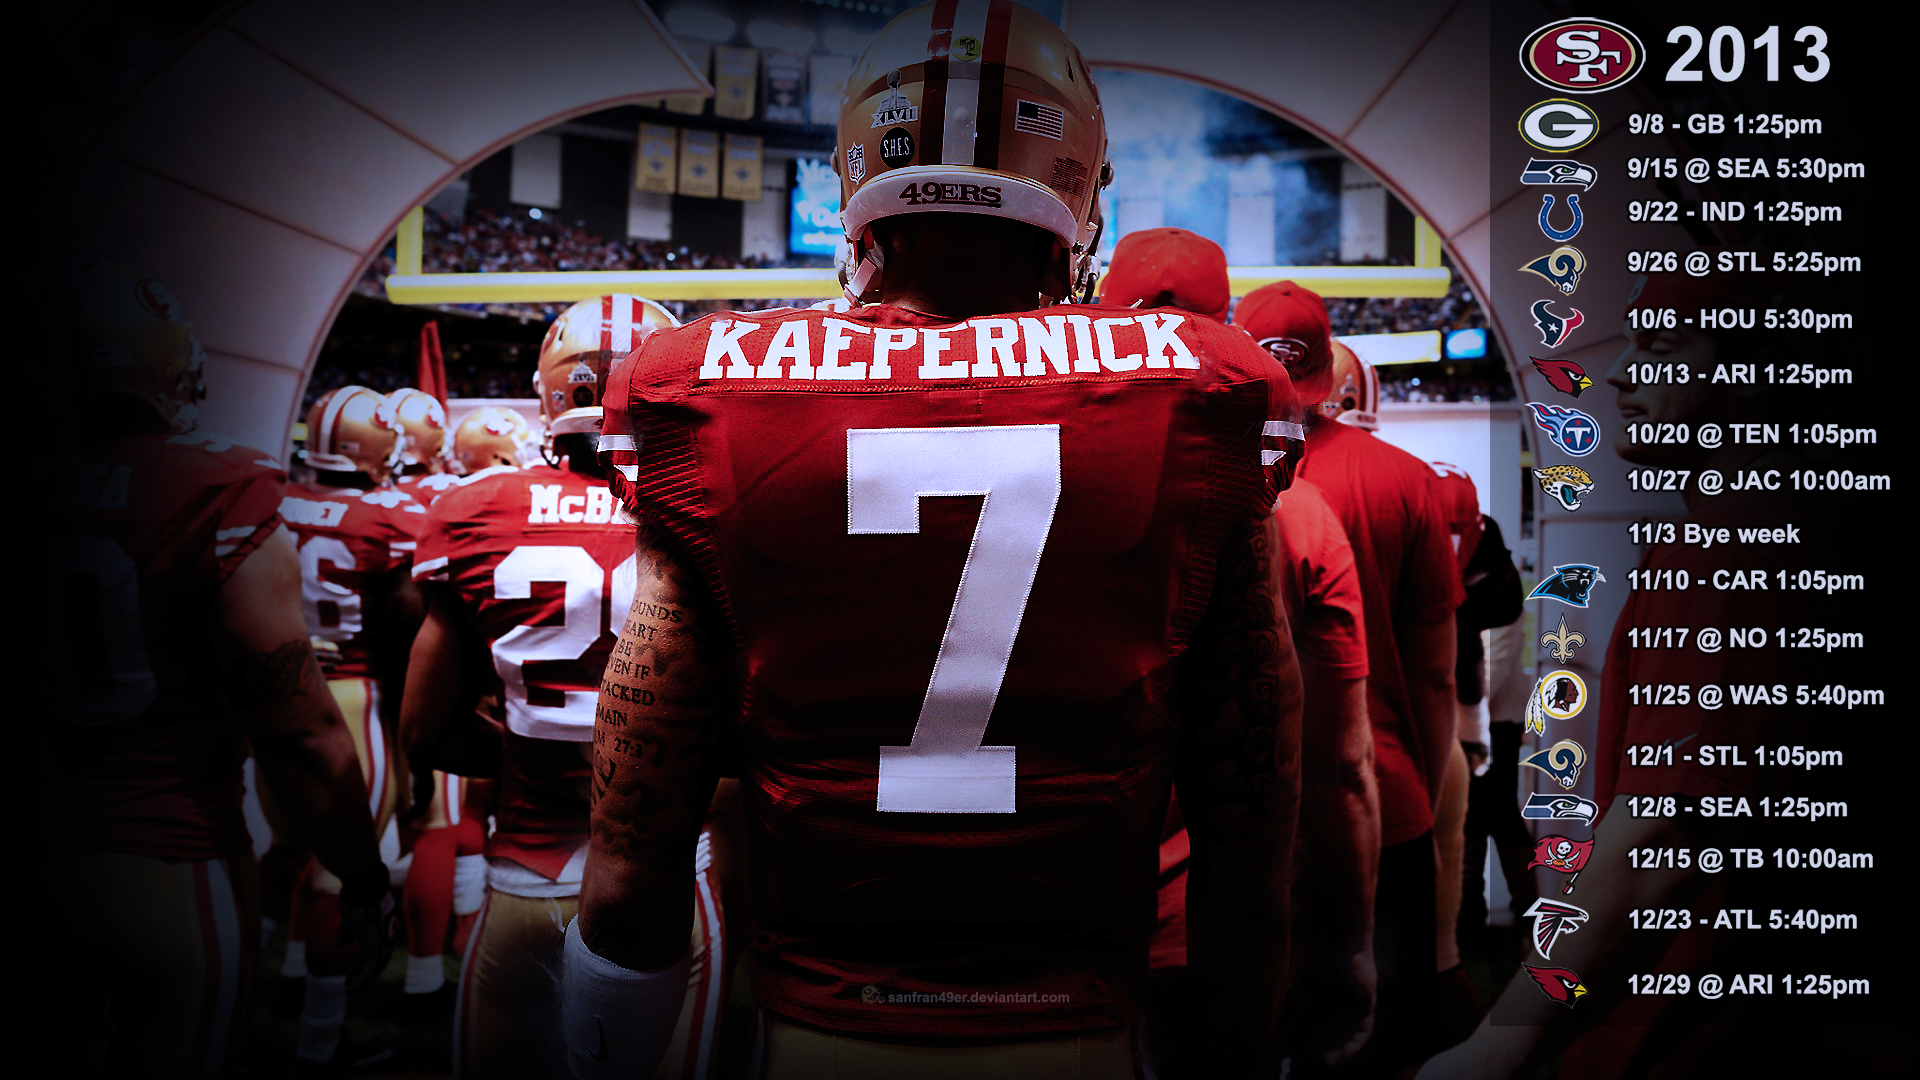 Kaepernick Wallpaper With Schedule Pst By Sanfran49er On